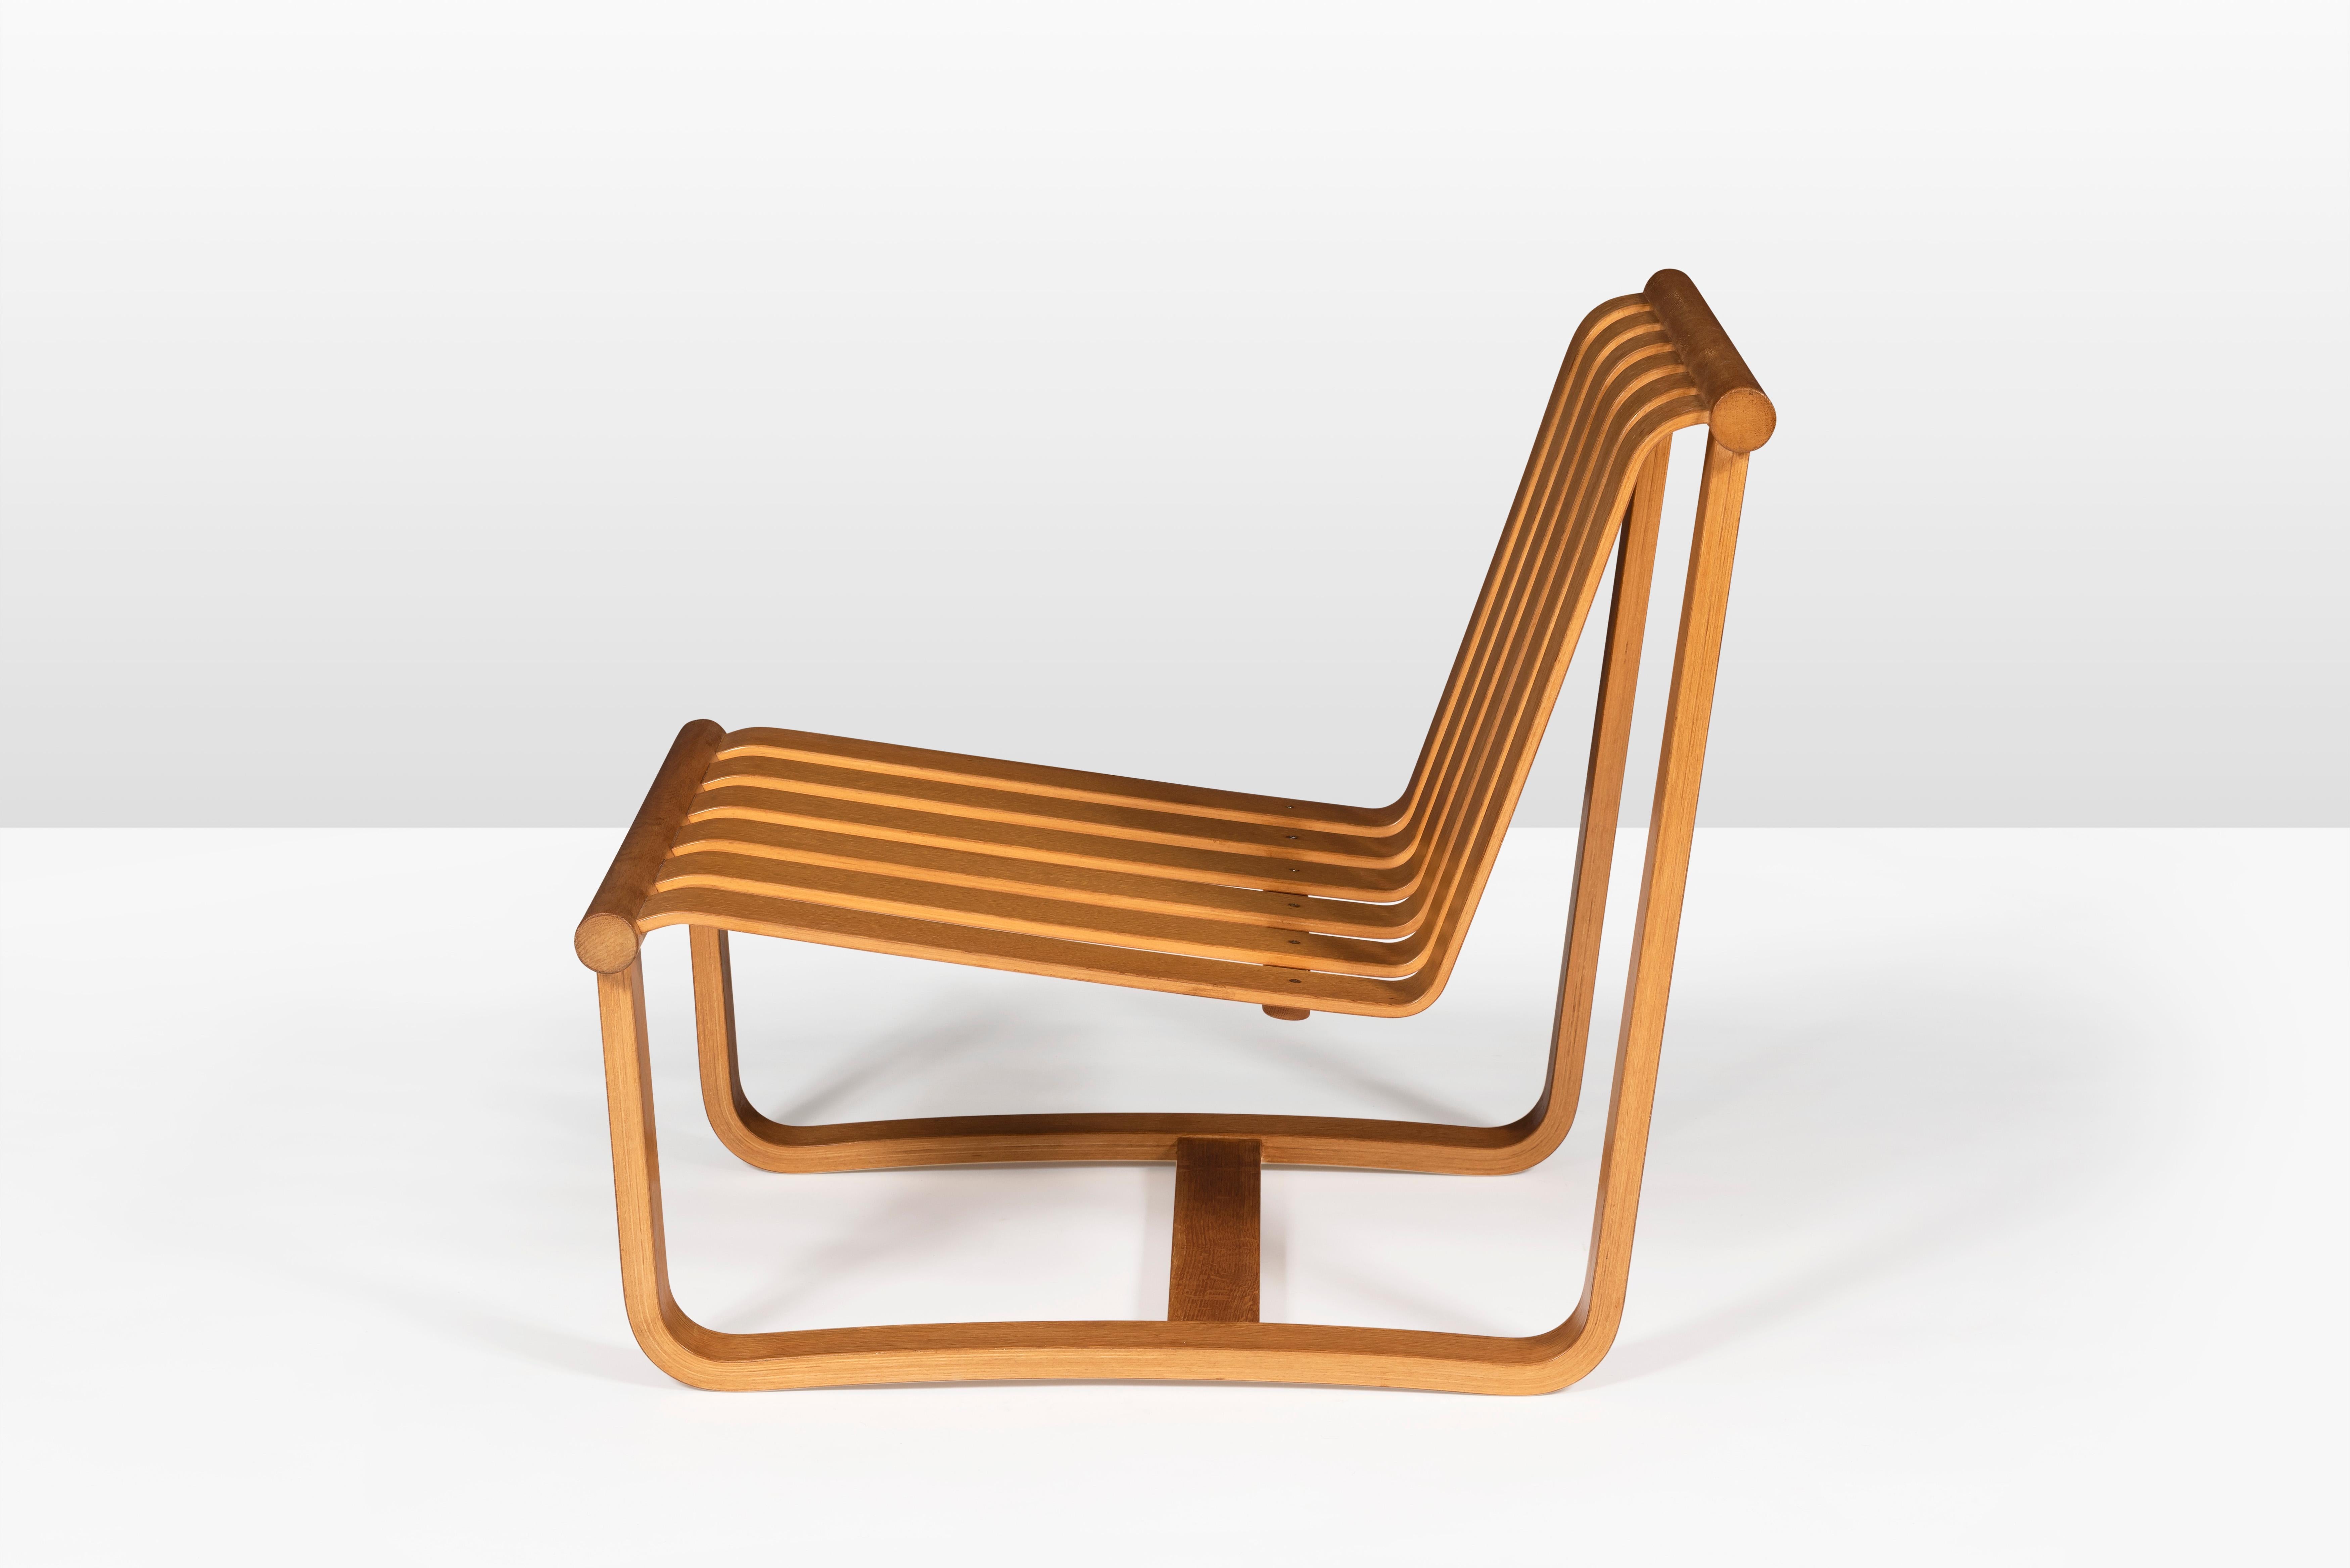 A spare and elegant lounge chair design by Japanese furniture designer Katsuo Matsumura (1923-1991), produced in 1971. Custom made cushions can be added to this chair.
After graduating from the Tokyo Fine Arts School, Mastumura worked in the design